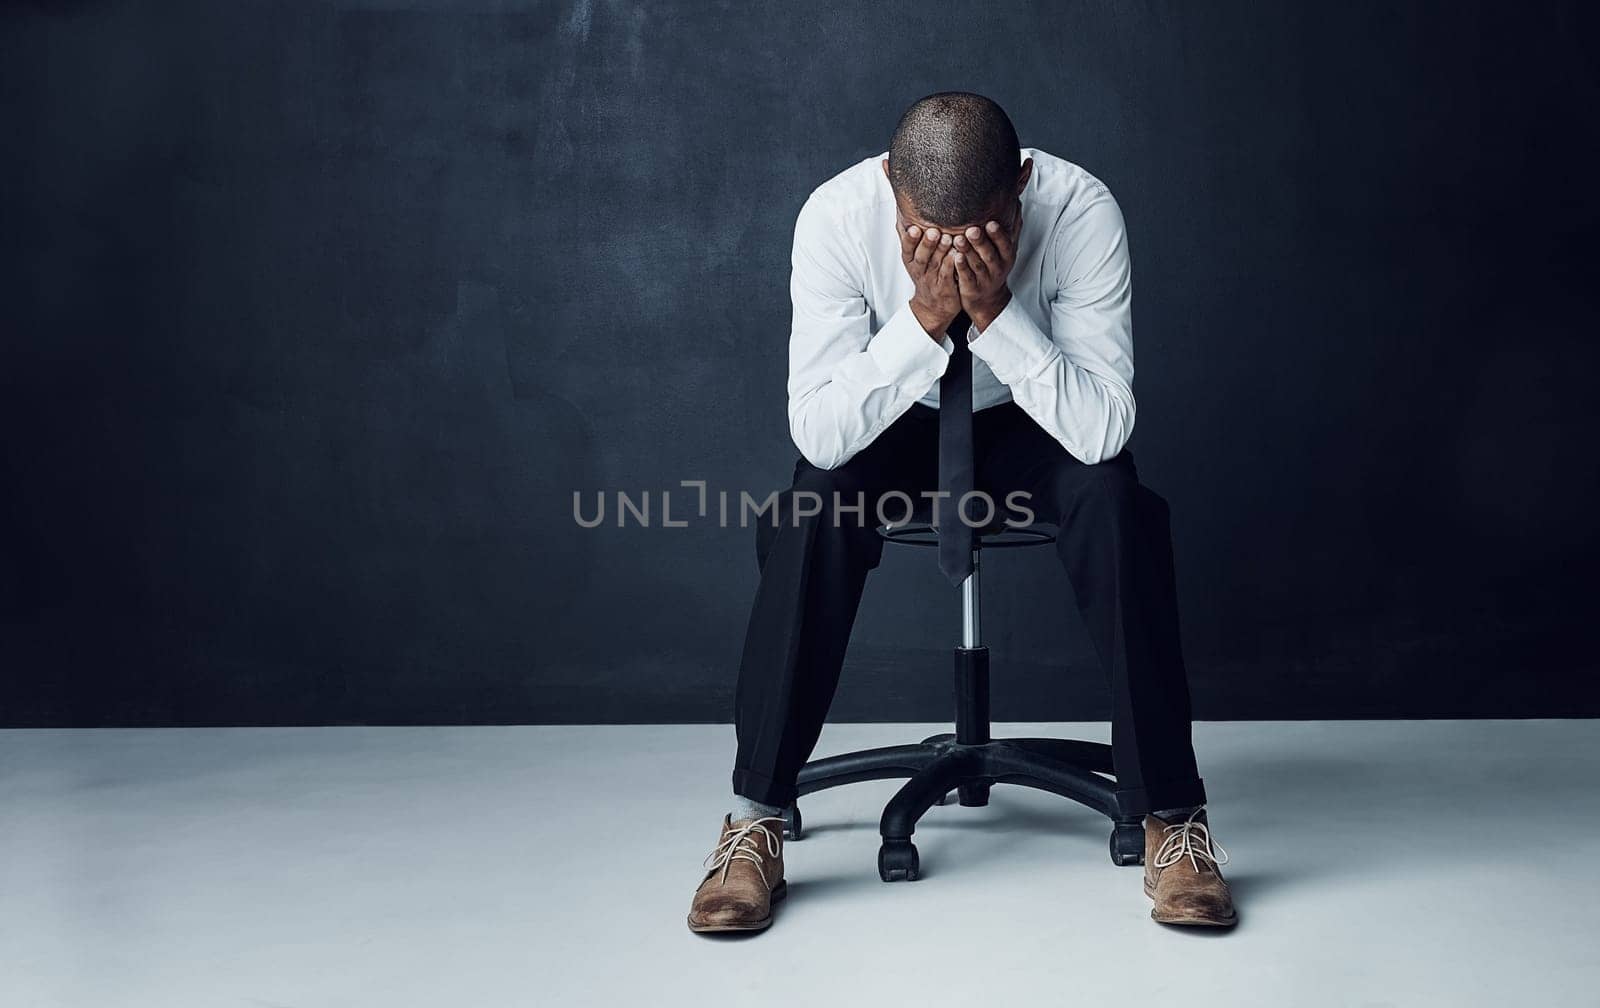 Everyone has battles to face before they see success. Studio shot of a young businessman sitting with his hands covering his face against a dark background. by YuriArcurs